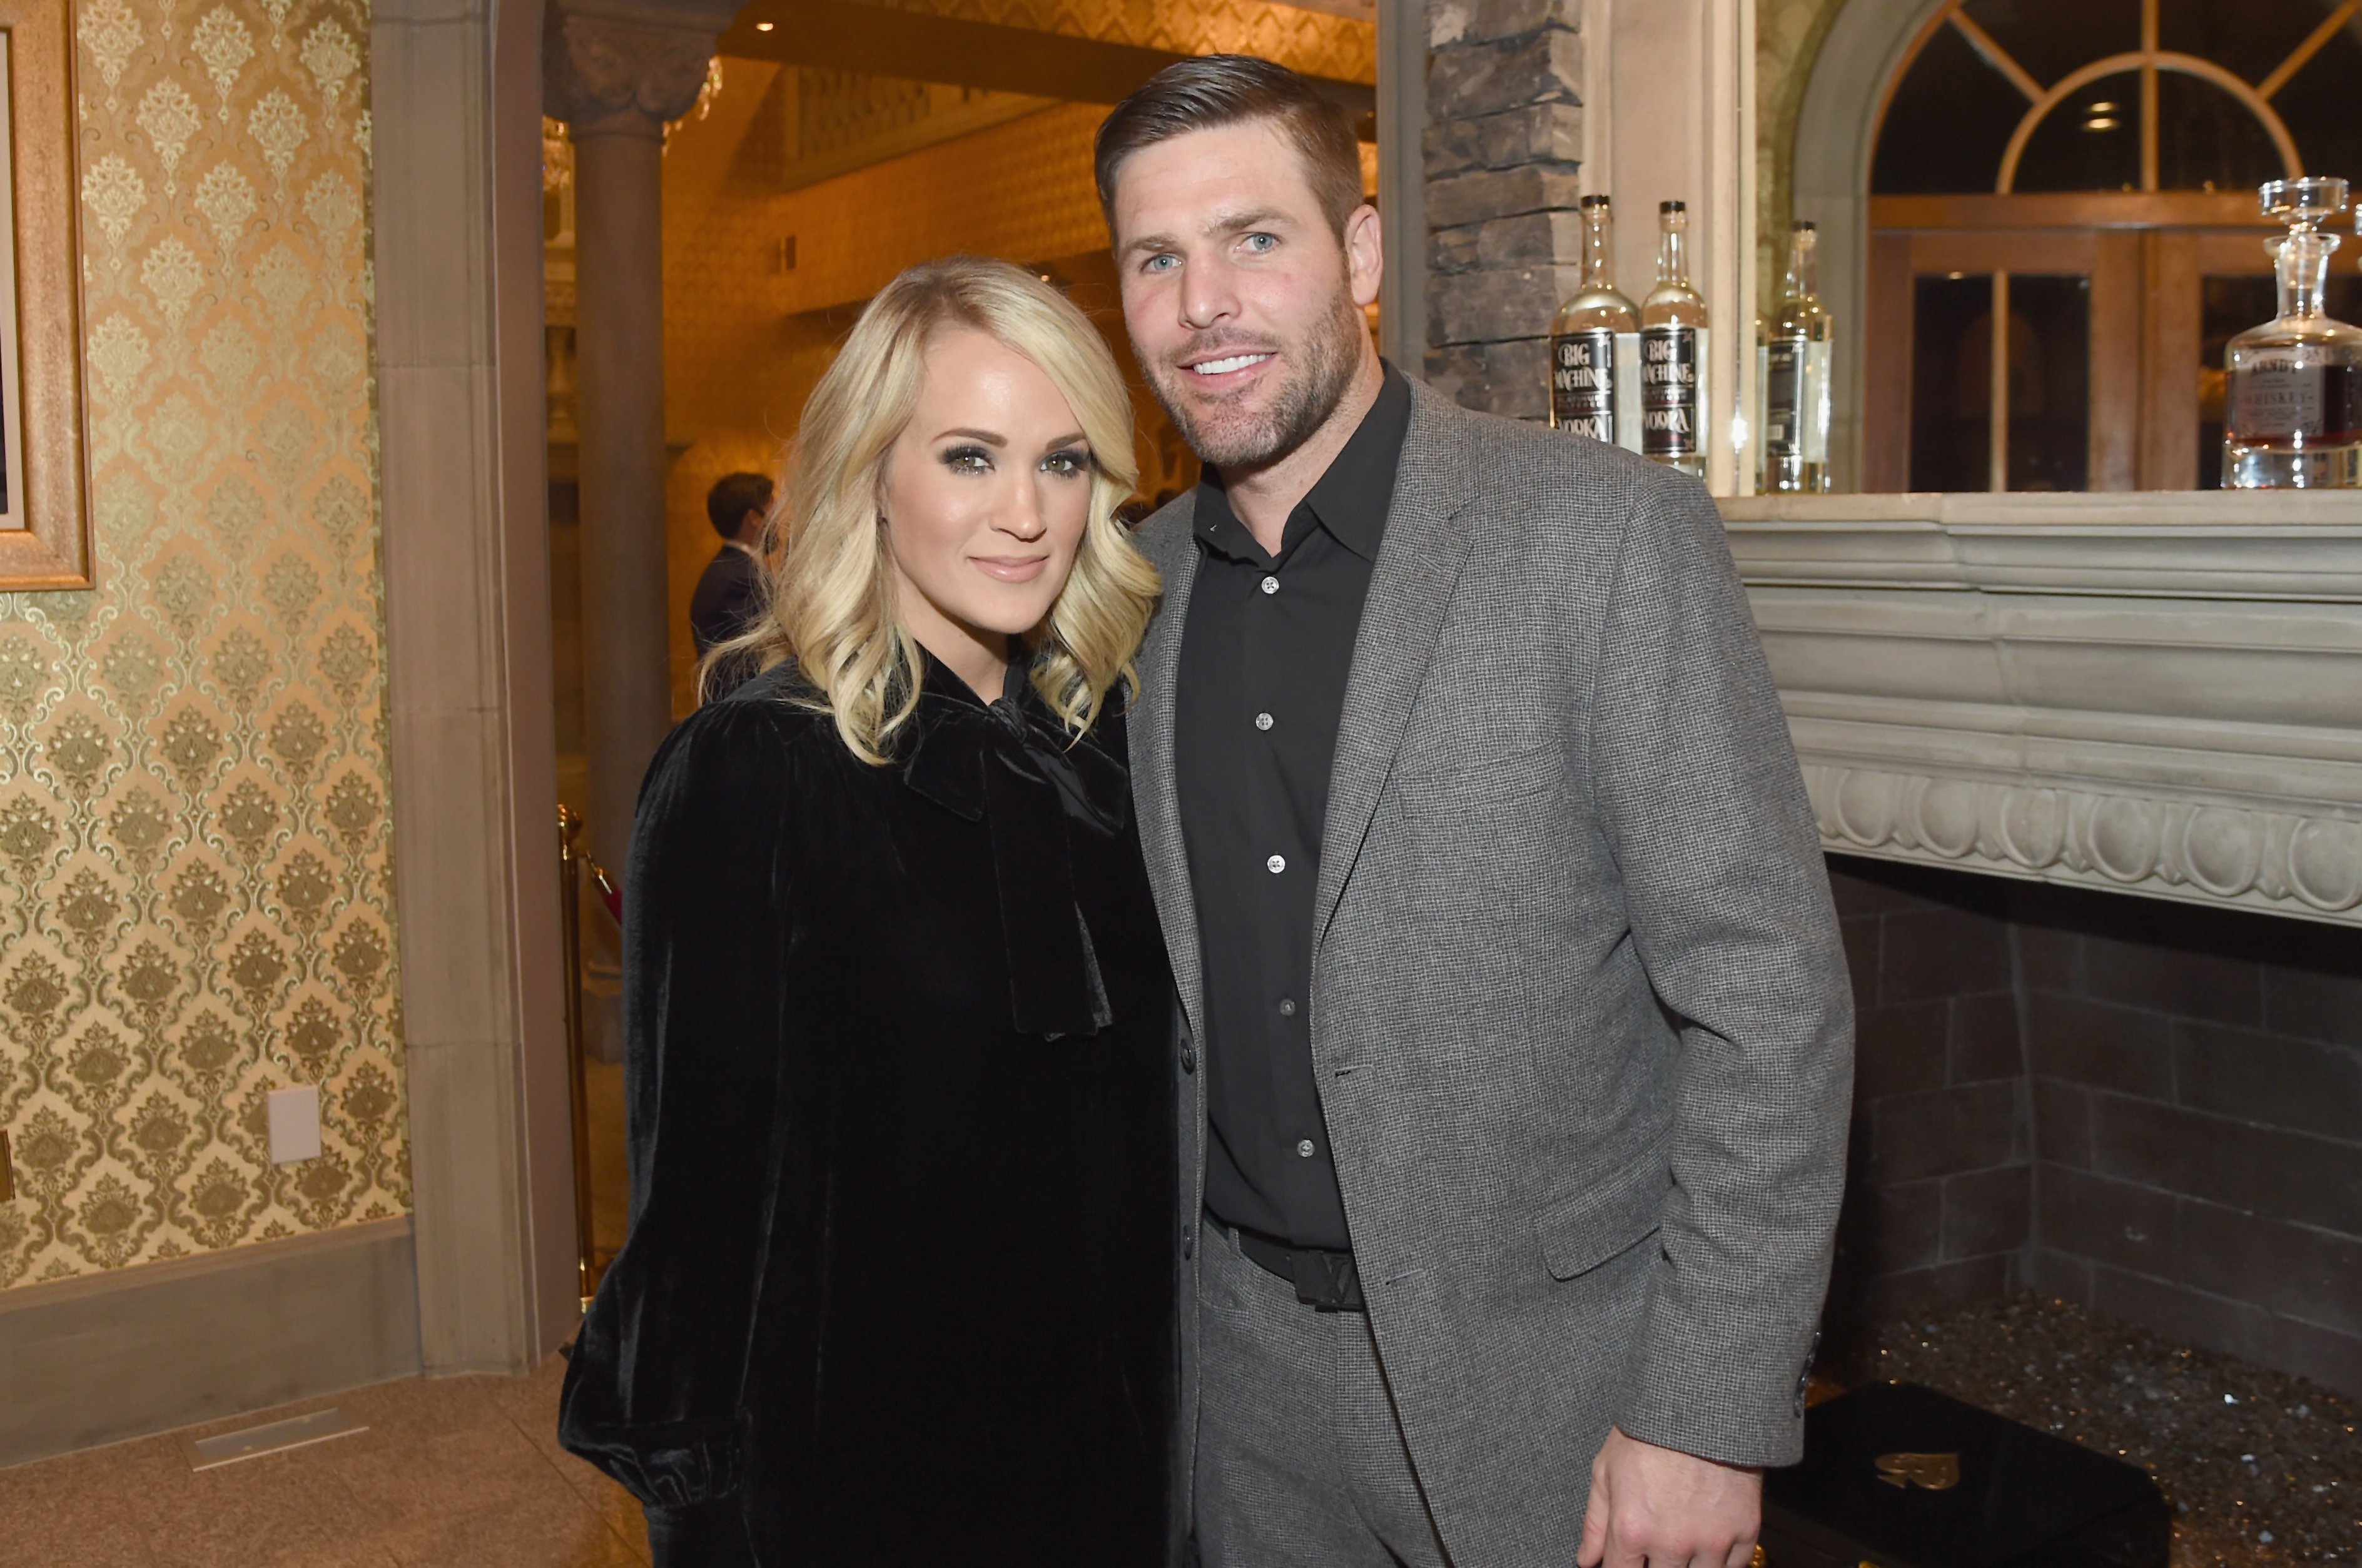 Singer-songwriter Carrie Underwood and NHL Player Mike Fisher attend Nashville Shines at the Arndt Estate on October 24, 2017 in Brentwood, Tennessee. | Source: Getty Images